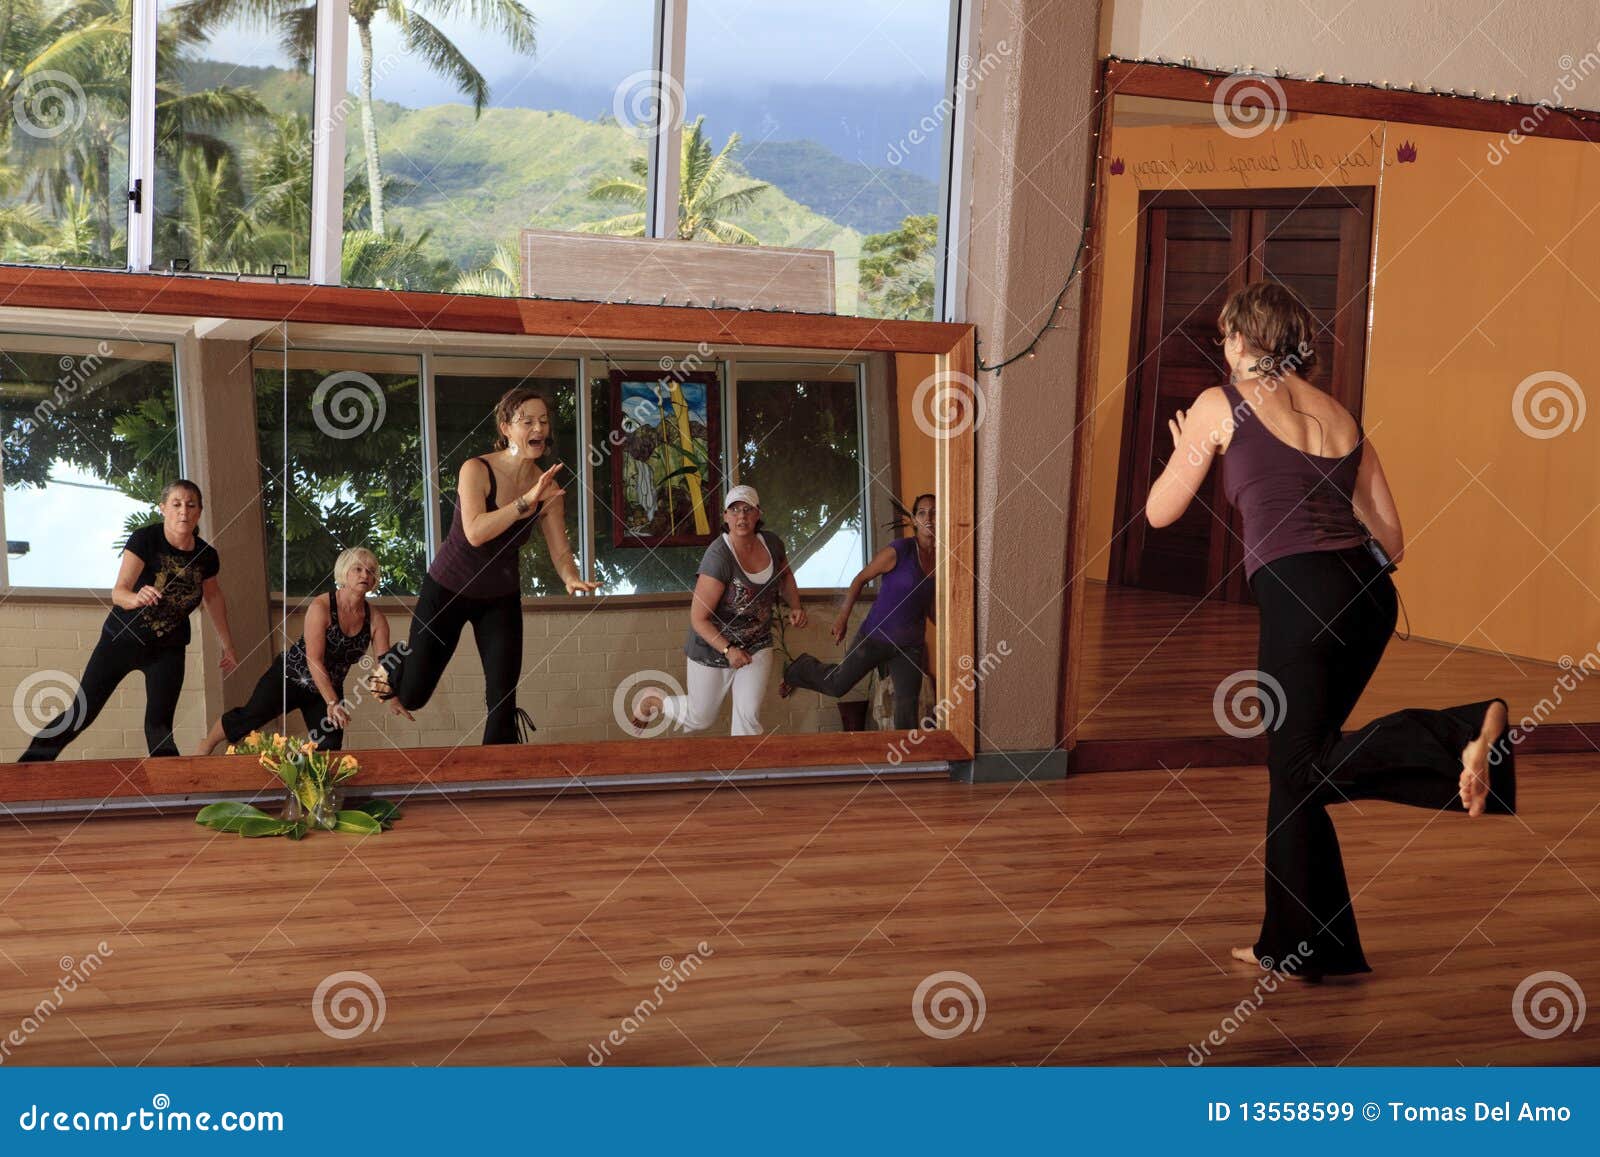 group of women in a nia exercise class